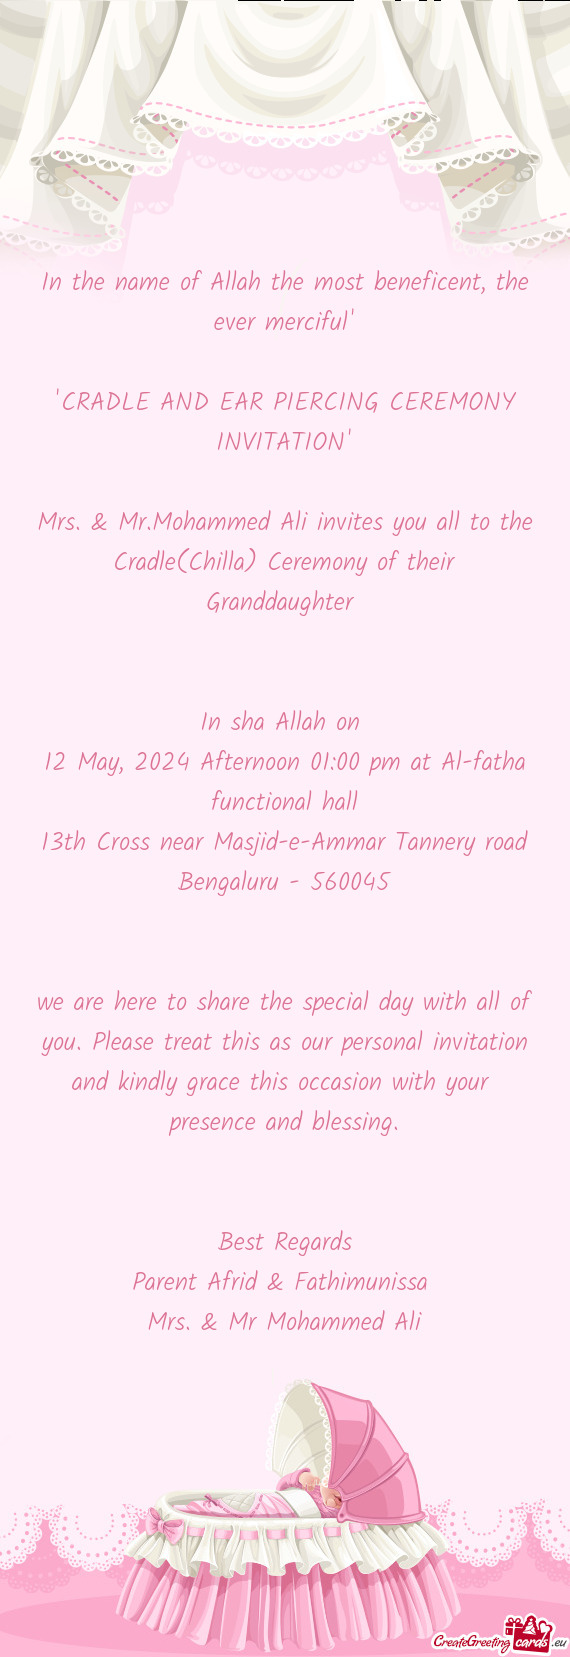 'CRADLE AND EAR PIERCING CEREMONY INVITATION'